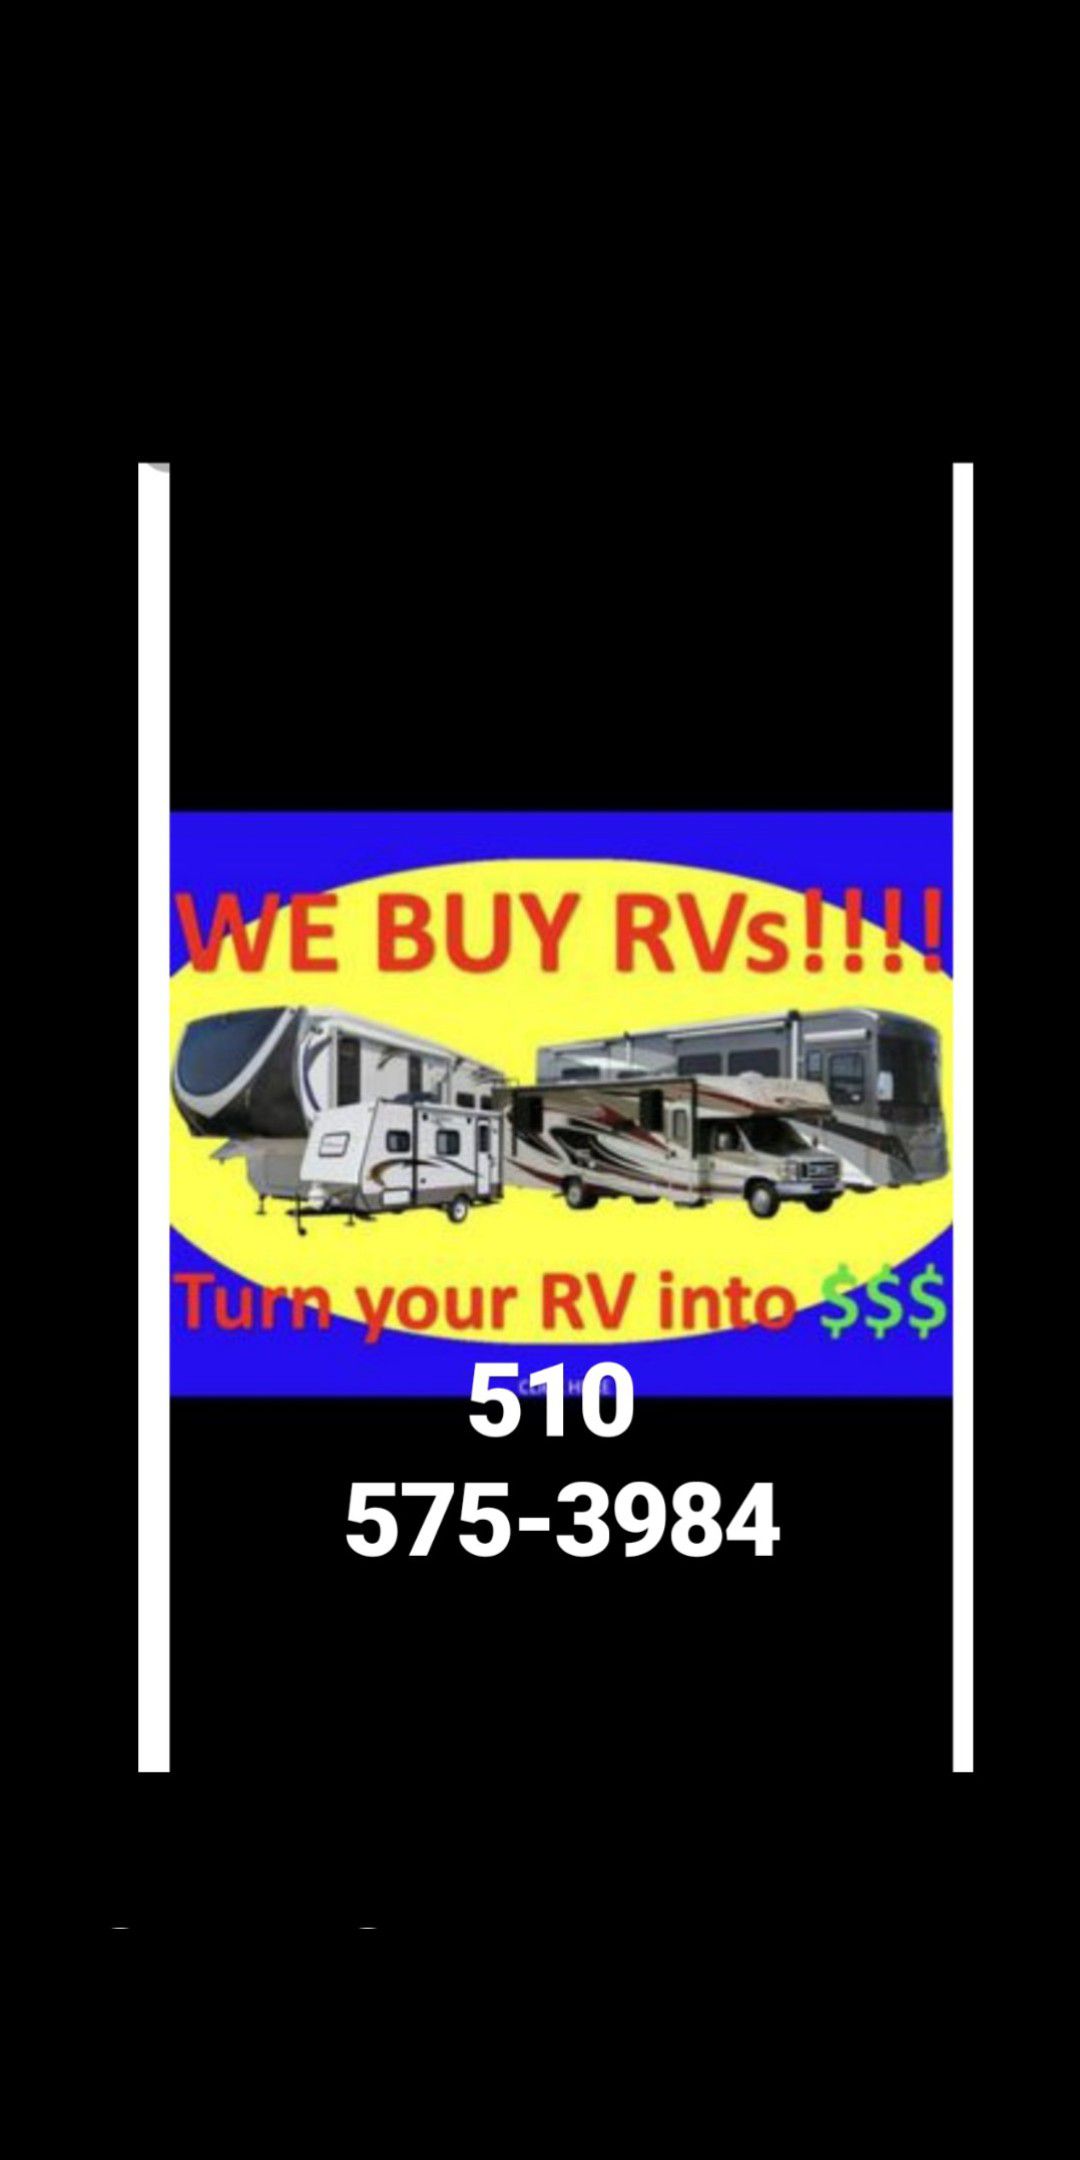 All RVs and travel trailers